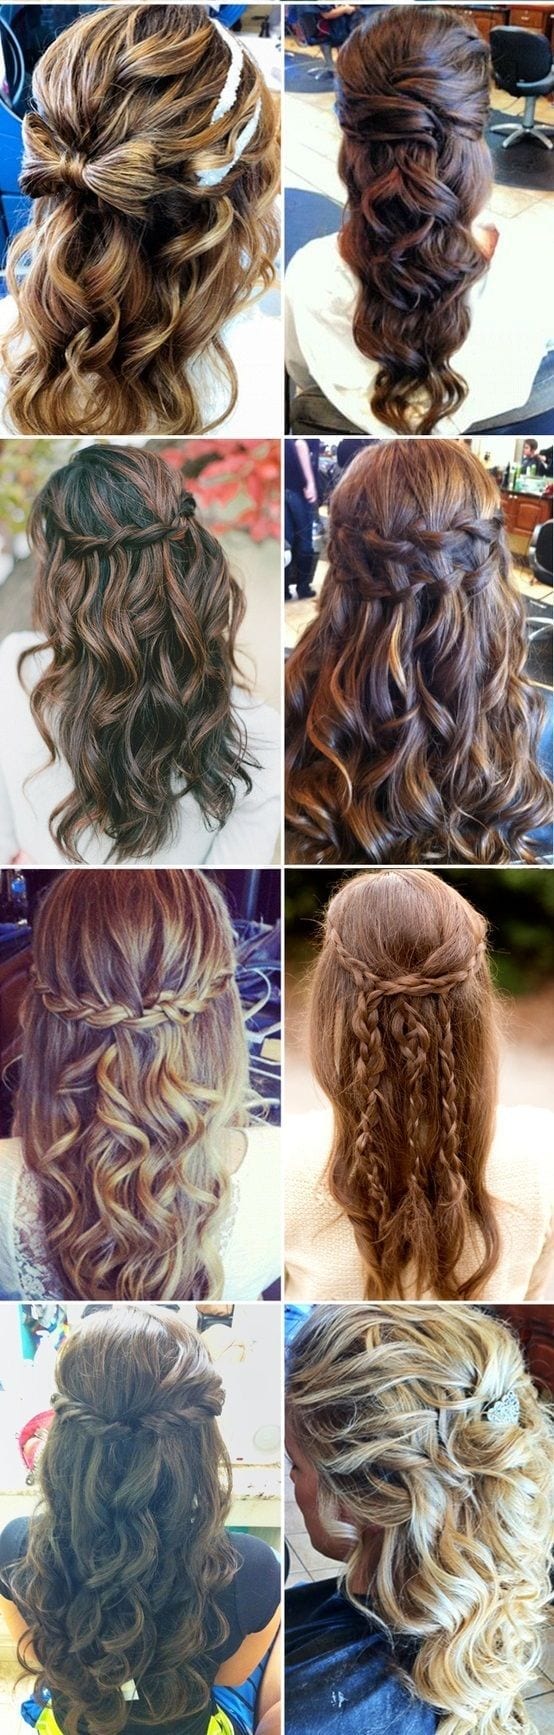 winter hairstyles for college girls (1)